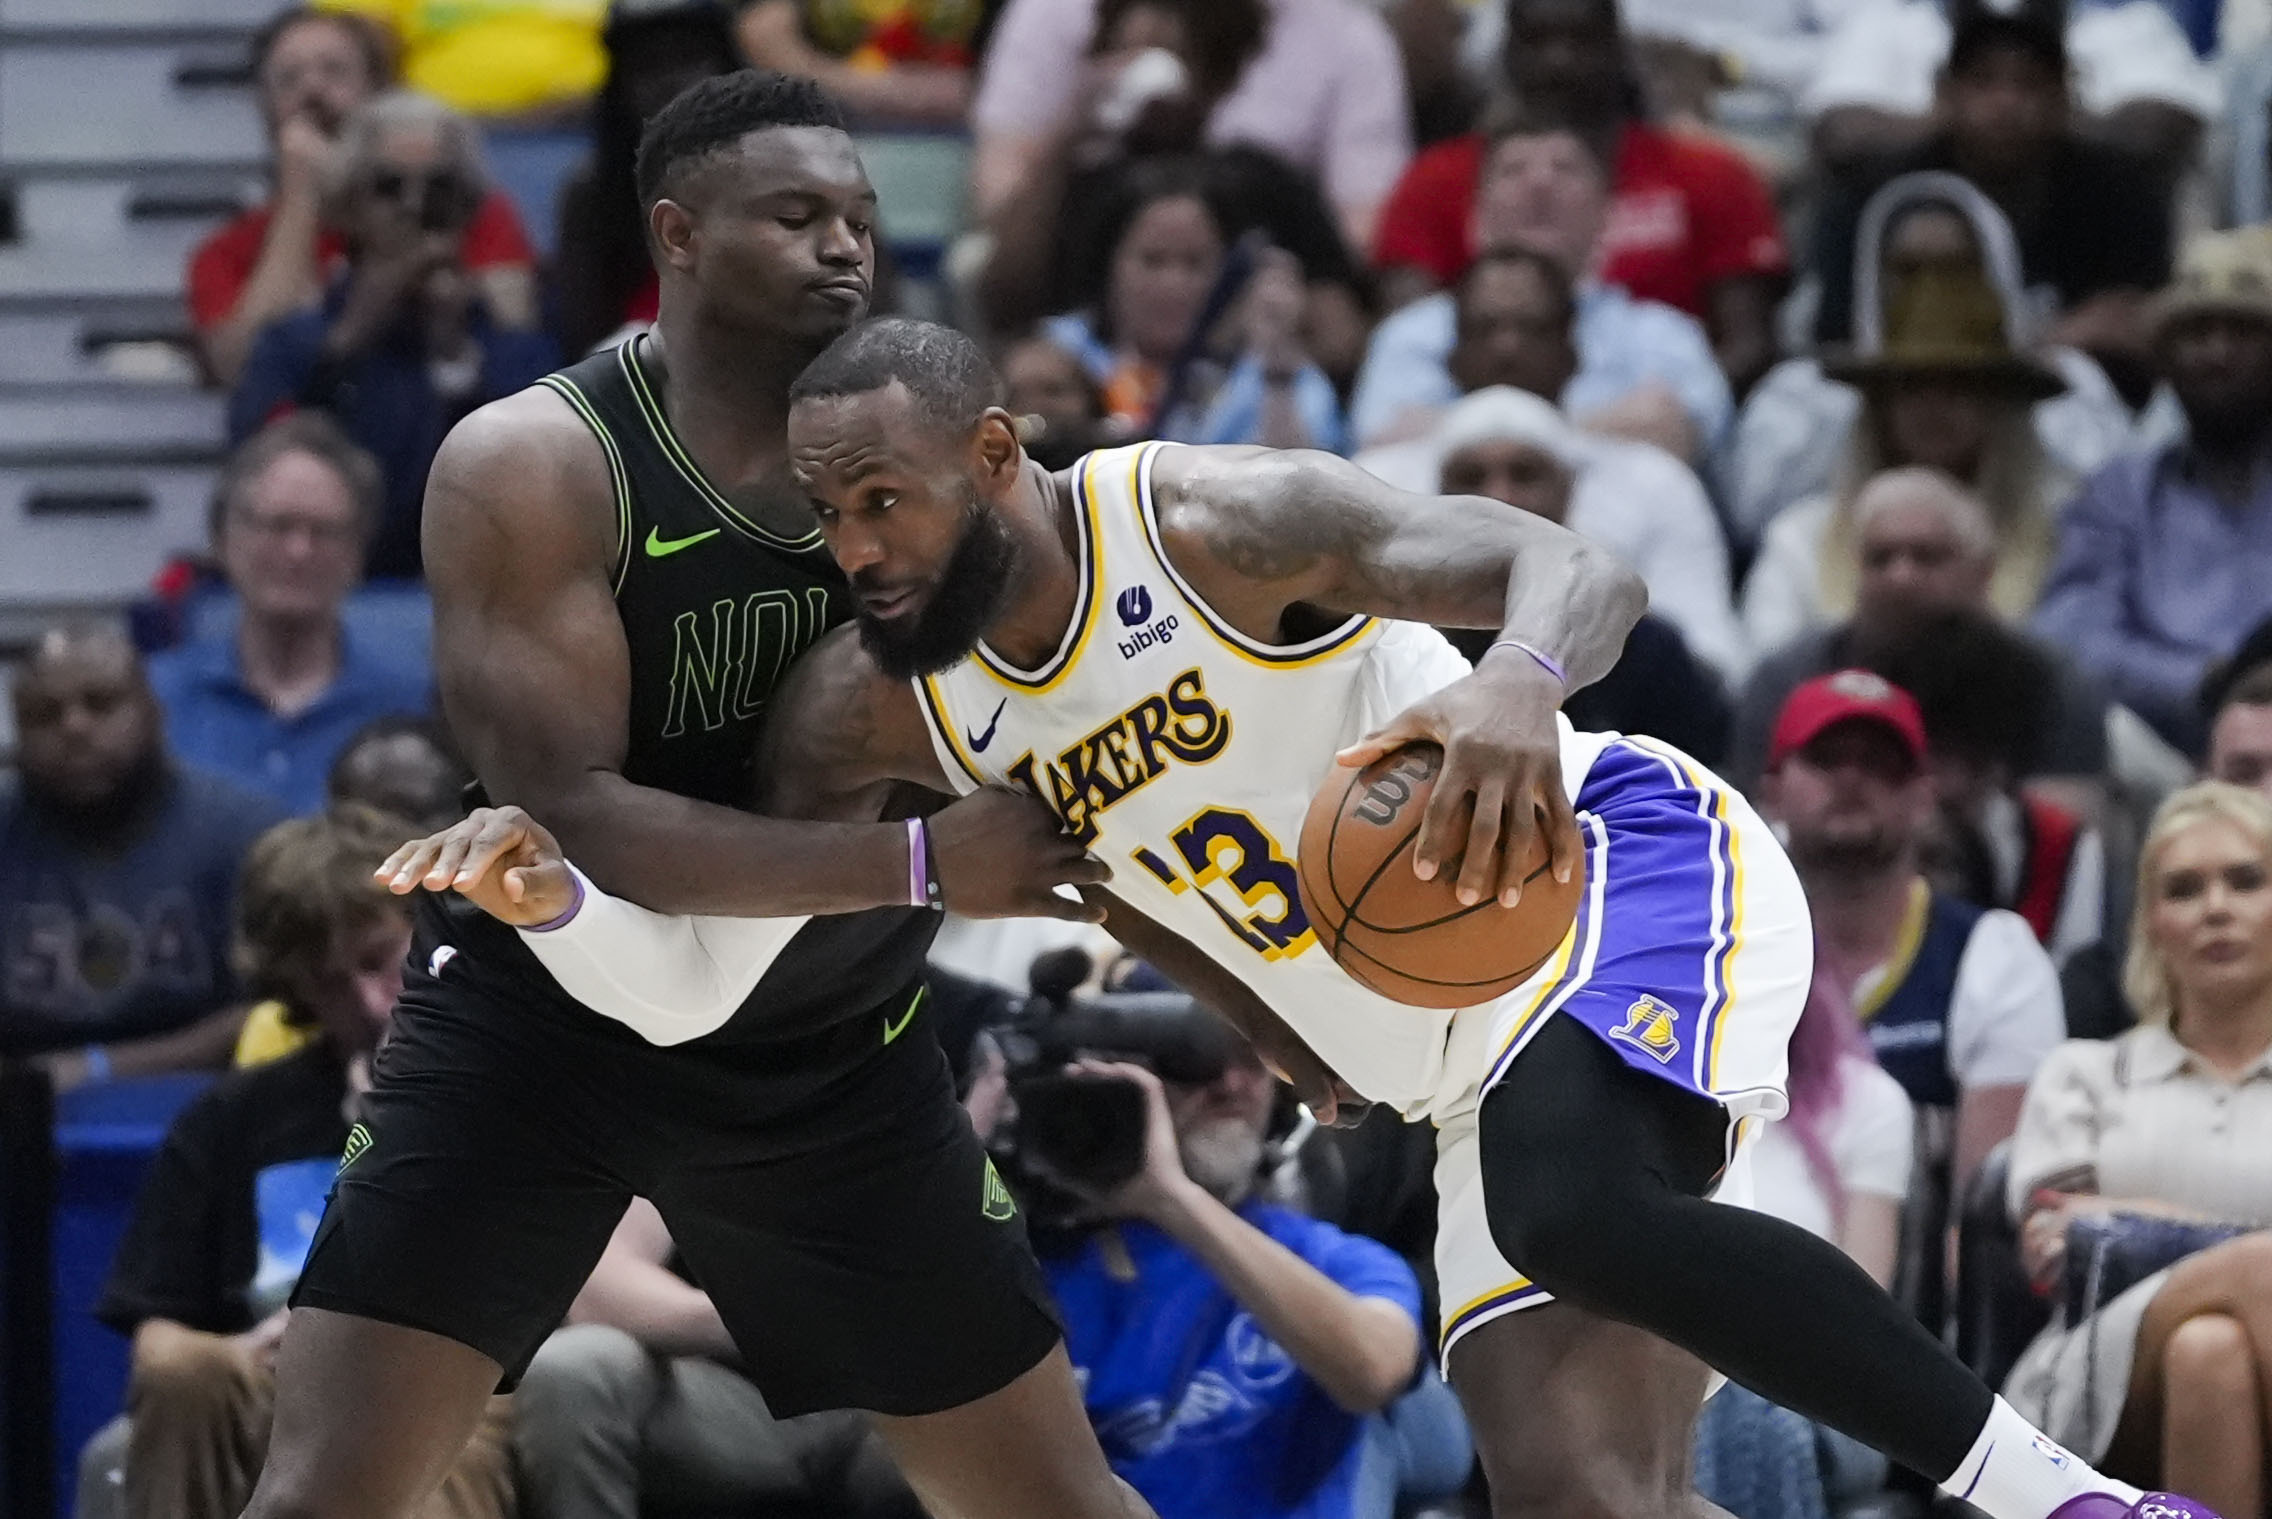 lebron, lakers take on pelicans as nba play-in tips off